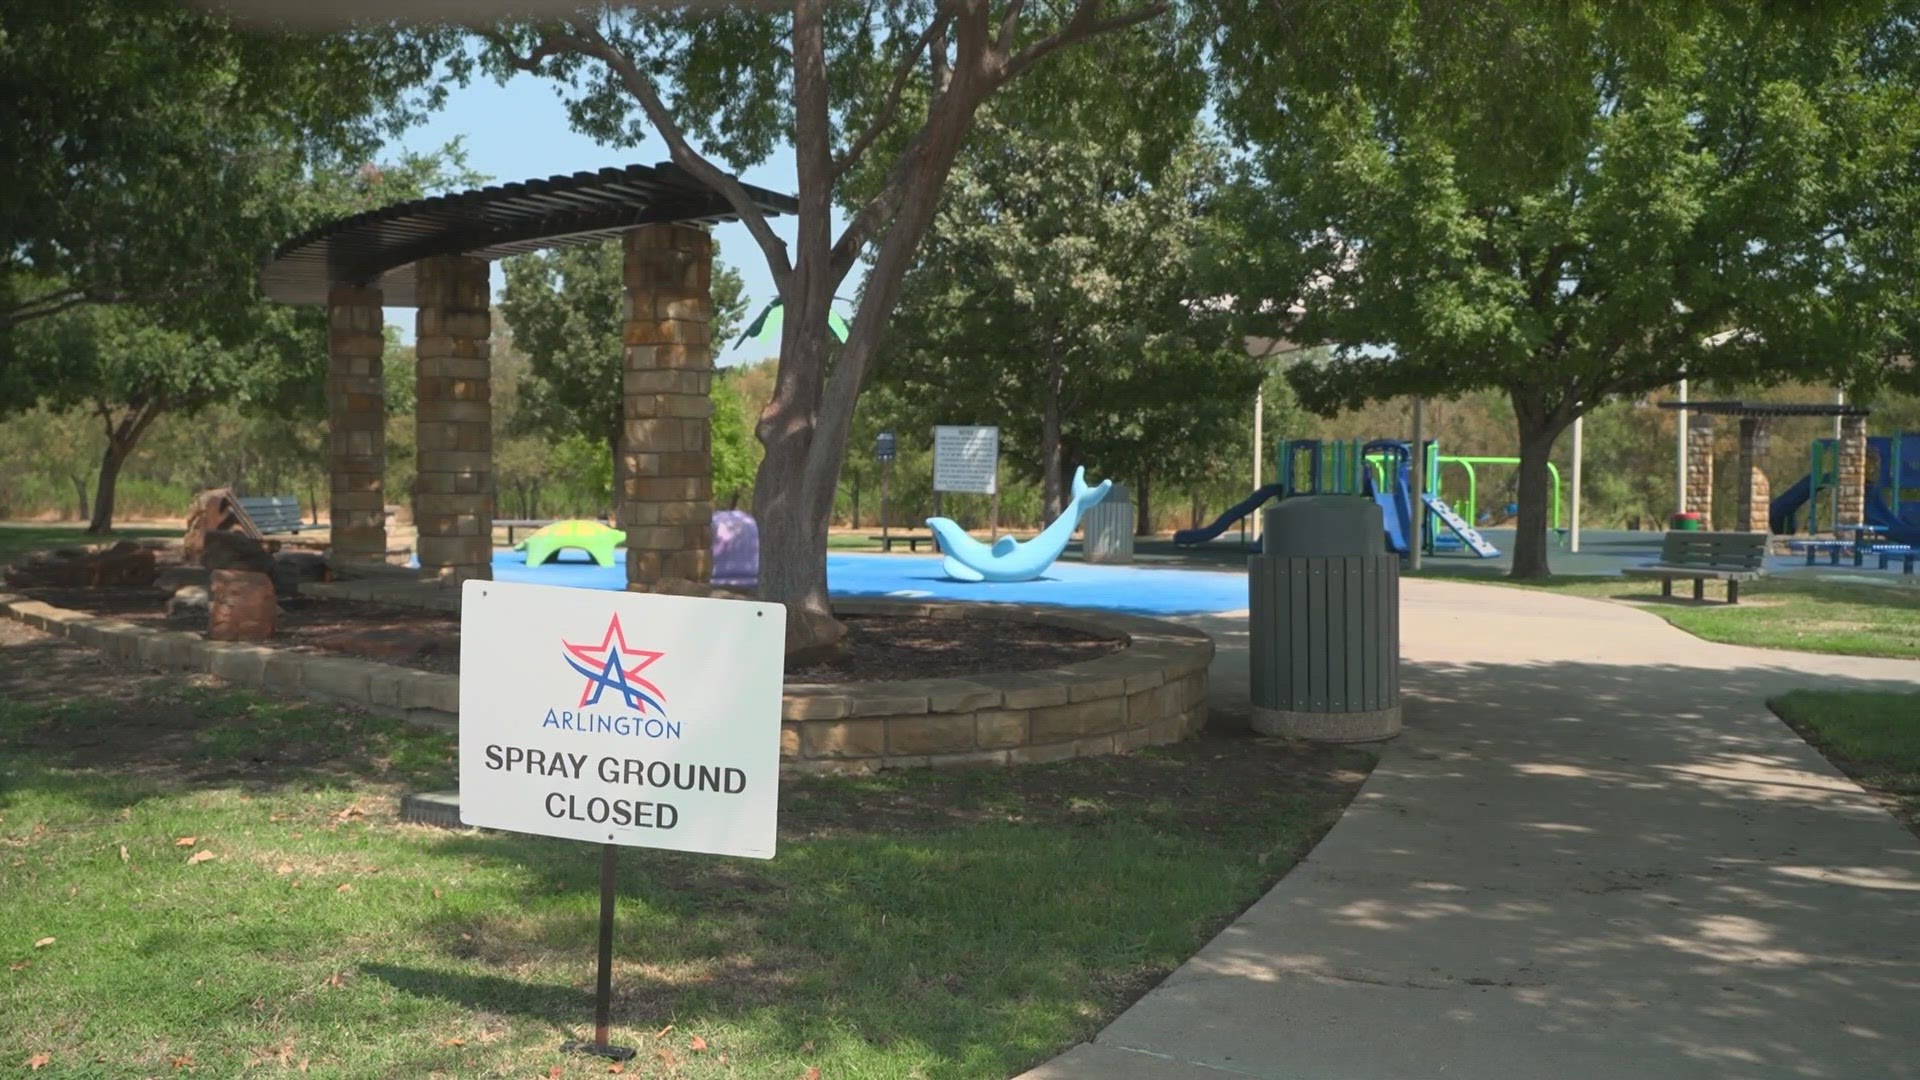 A test of one splash pad tested positive for the possible presence of a brain-eating amoeba. There have been no reported infections so far.